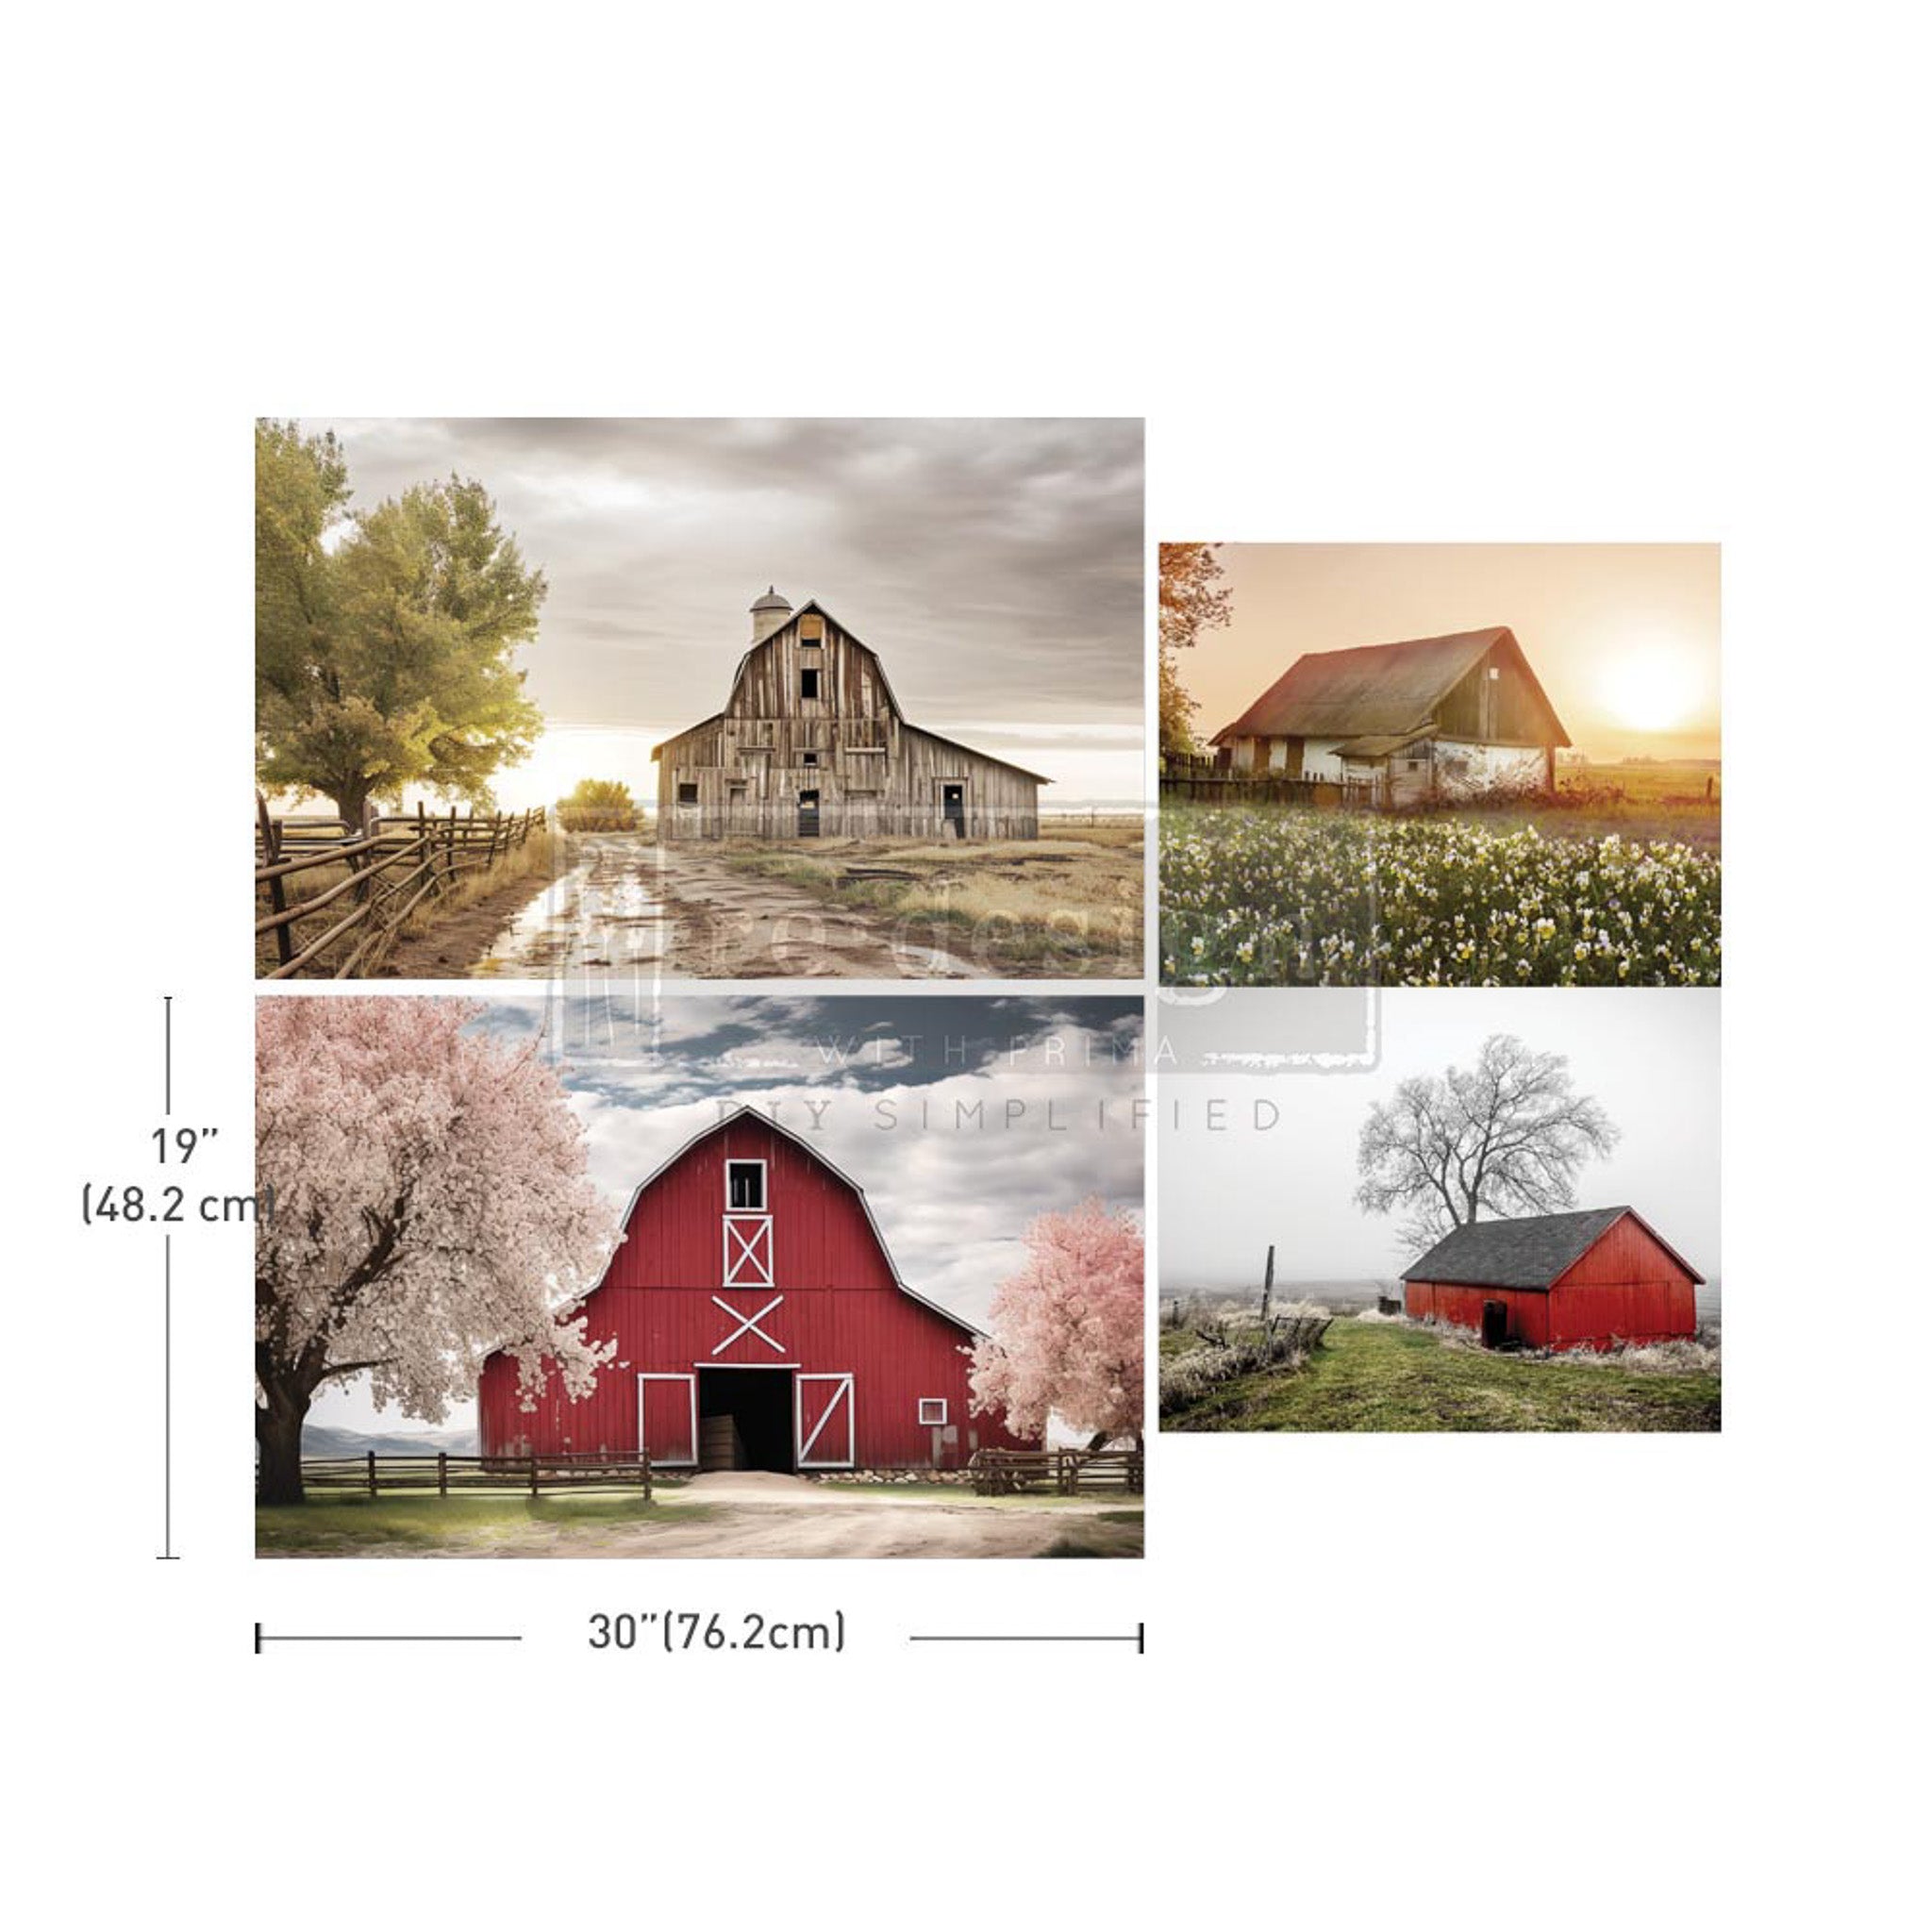 Three sheets of ReDesign with Prima's Haystack Hues tissue paper feature enchanting scenes with old barns on farms are against a white background. Measurements for 1 sheet reads:19" (48.2 cm) by 30" (76.2 cm).